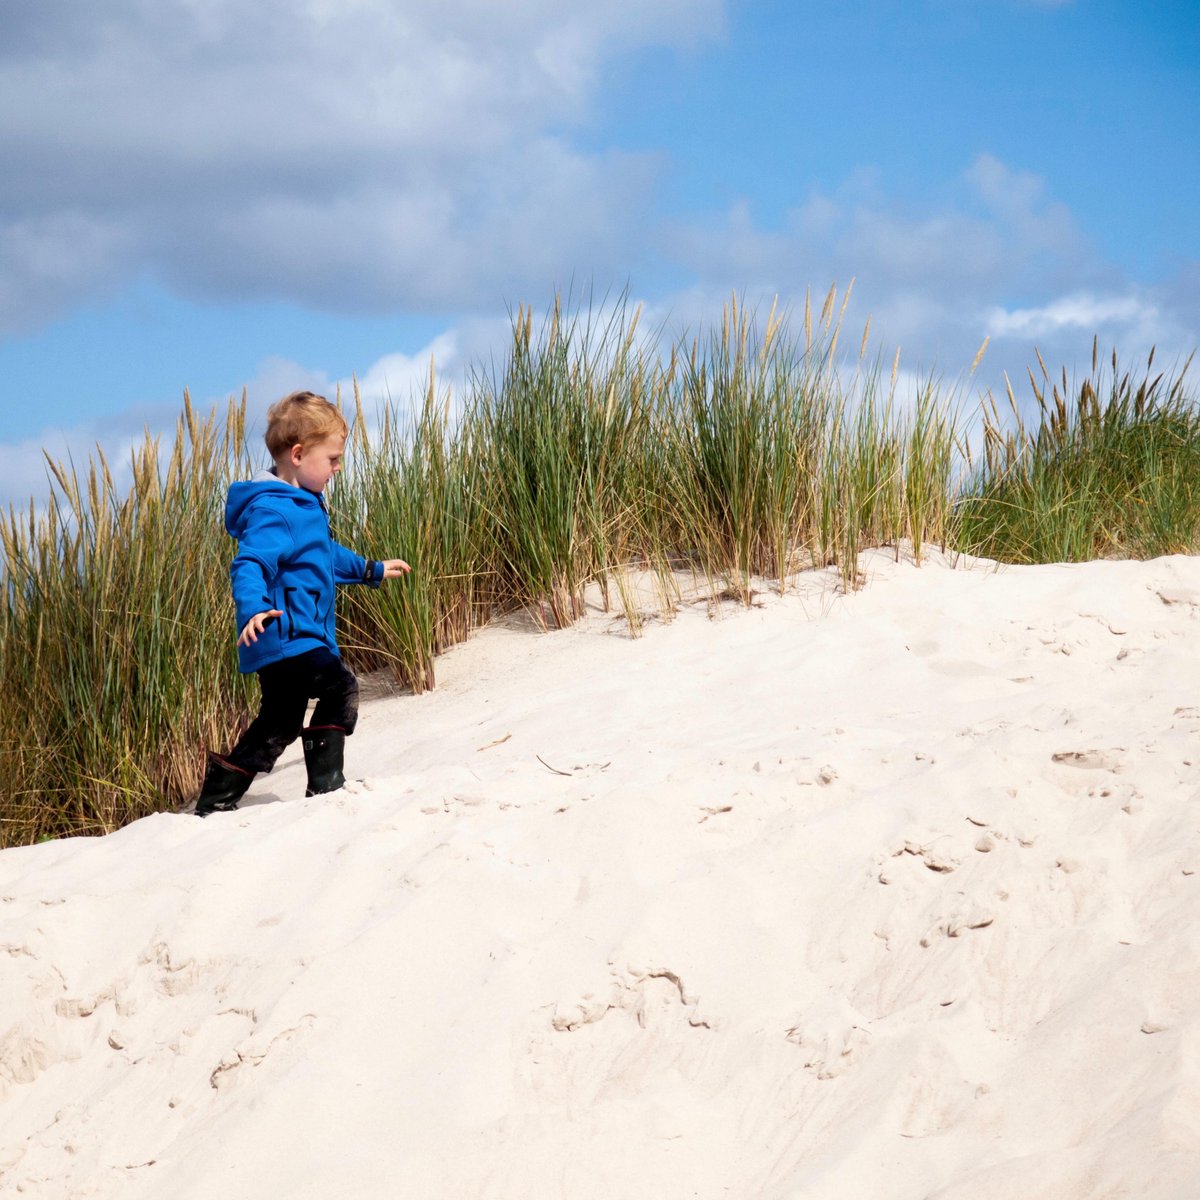 Winter weekend breaks at our #cambersands #seasidecottages cottages are special. Find out more bit.ly/CamberSandsWee… #dogswelcome #familyfriendly #weekendbreak #letsunwind #thesaltydog #rocklobster